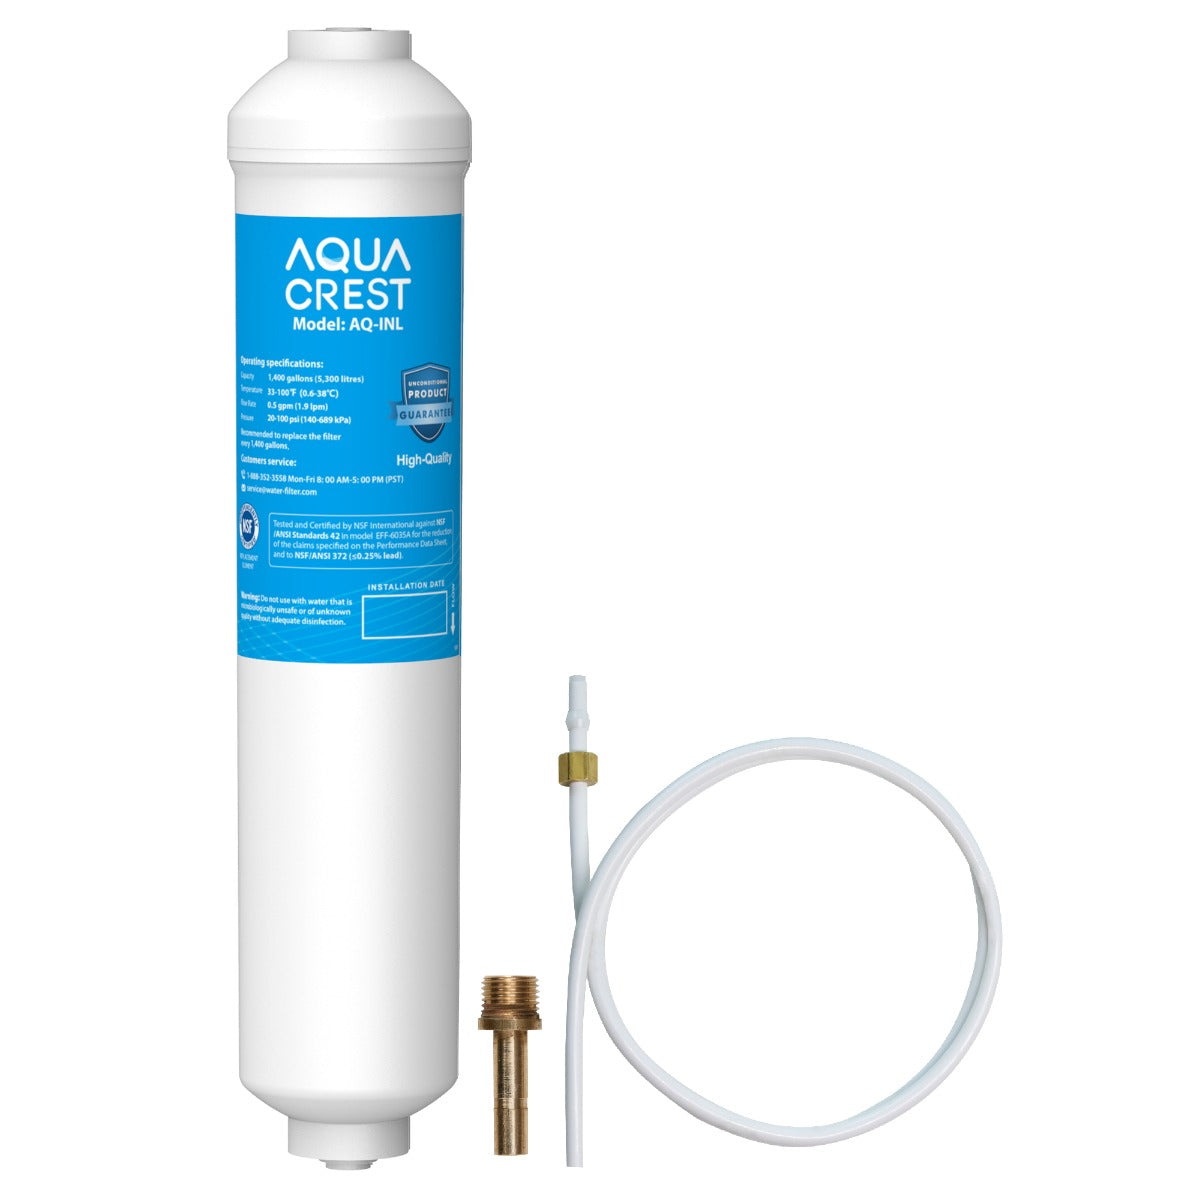 AQUACREST 5 Years Capacity-Inline Water Filter for Refrigerator with 1-4-Inch Direct Connect Fittings, Adapted to Ice Maker, Refrigerator, Under Sink Reverse Osmosis System